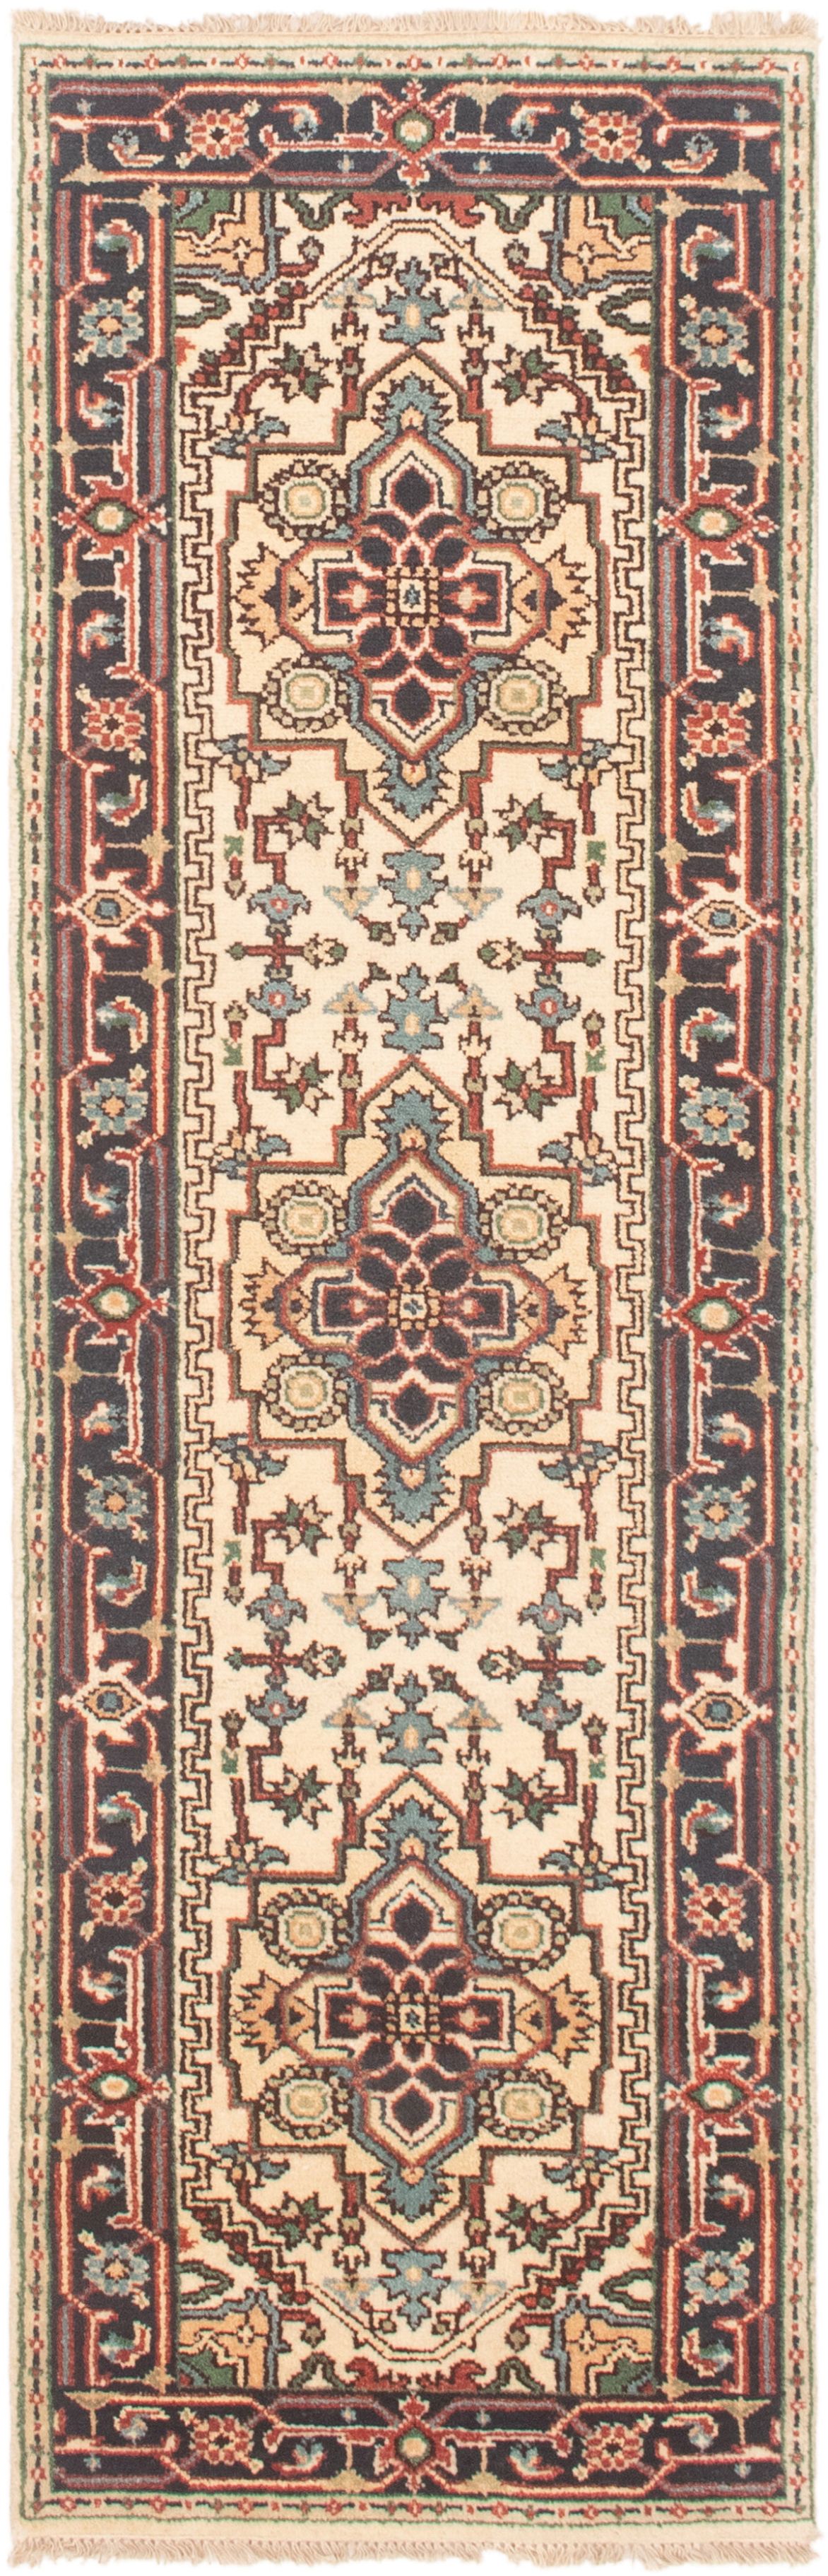 Hand-knotted Serapi Heritage Cream Wool Rug 2'7" x 8'0"  Size: 2'7" x 8'0"  